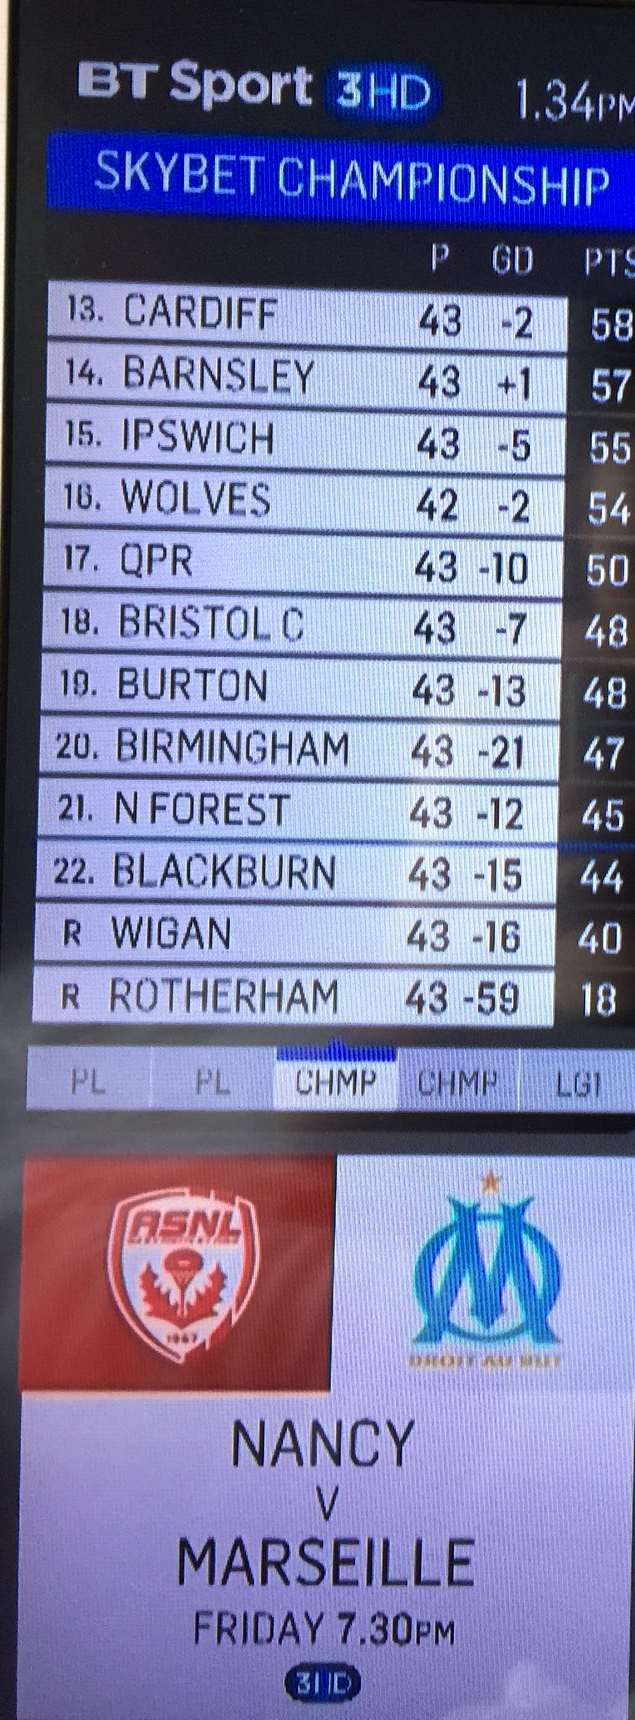 High Quality Wigan Is Relegated? Blank Meme Template